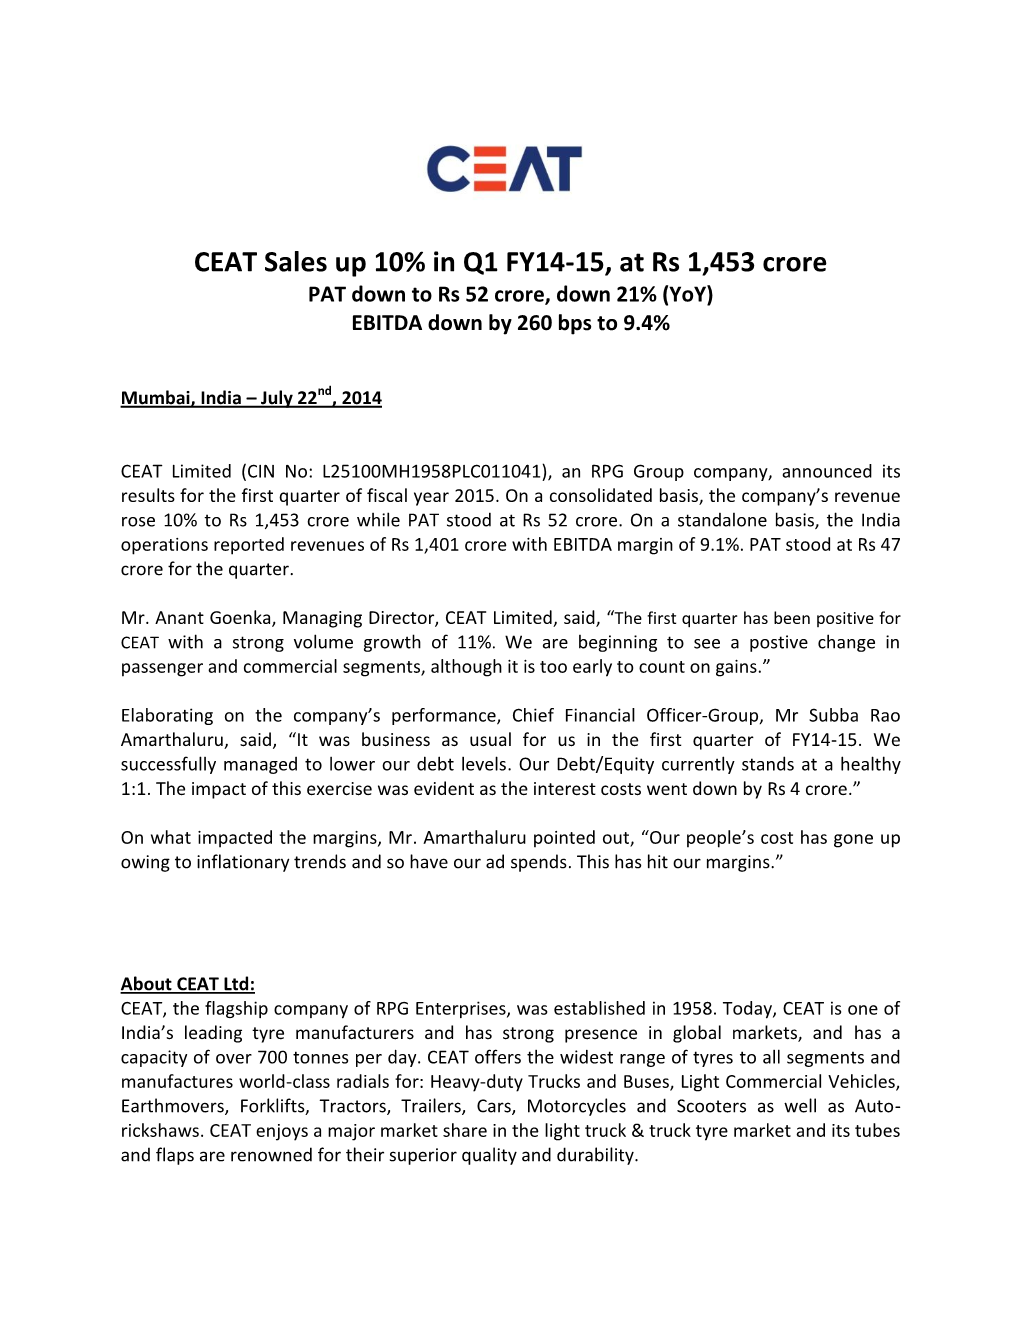 CEAT Sales up 10% in Q1 FY14-15, at Rs 1,453 Crore PAT Down to Rs 52 Crore, Down 21% (Yoy) EBITDA Down by 260 Bps to 9.4%